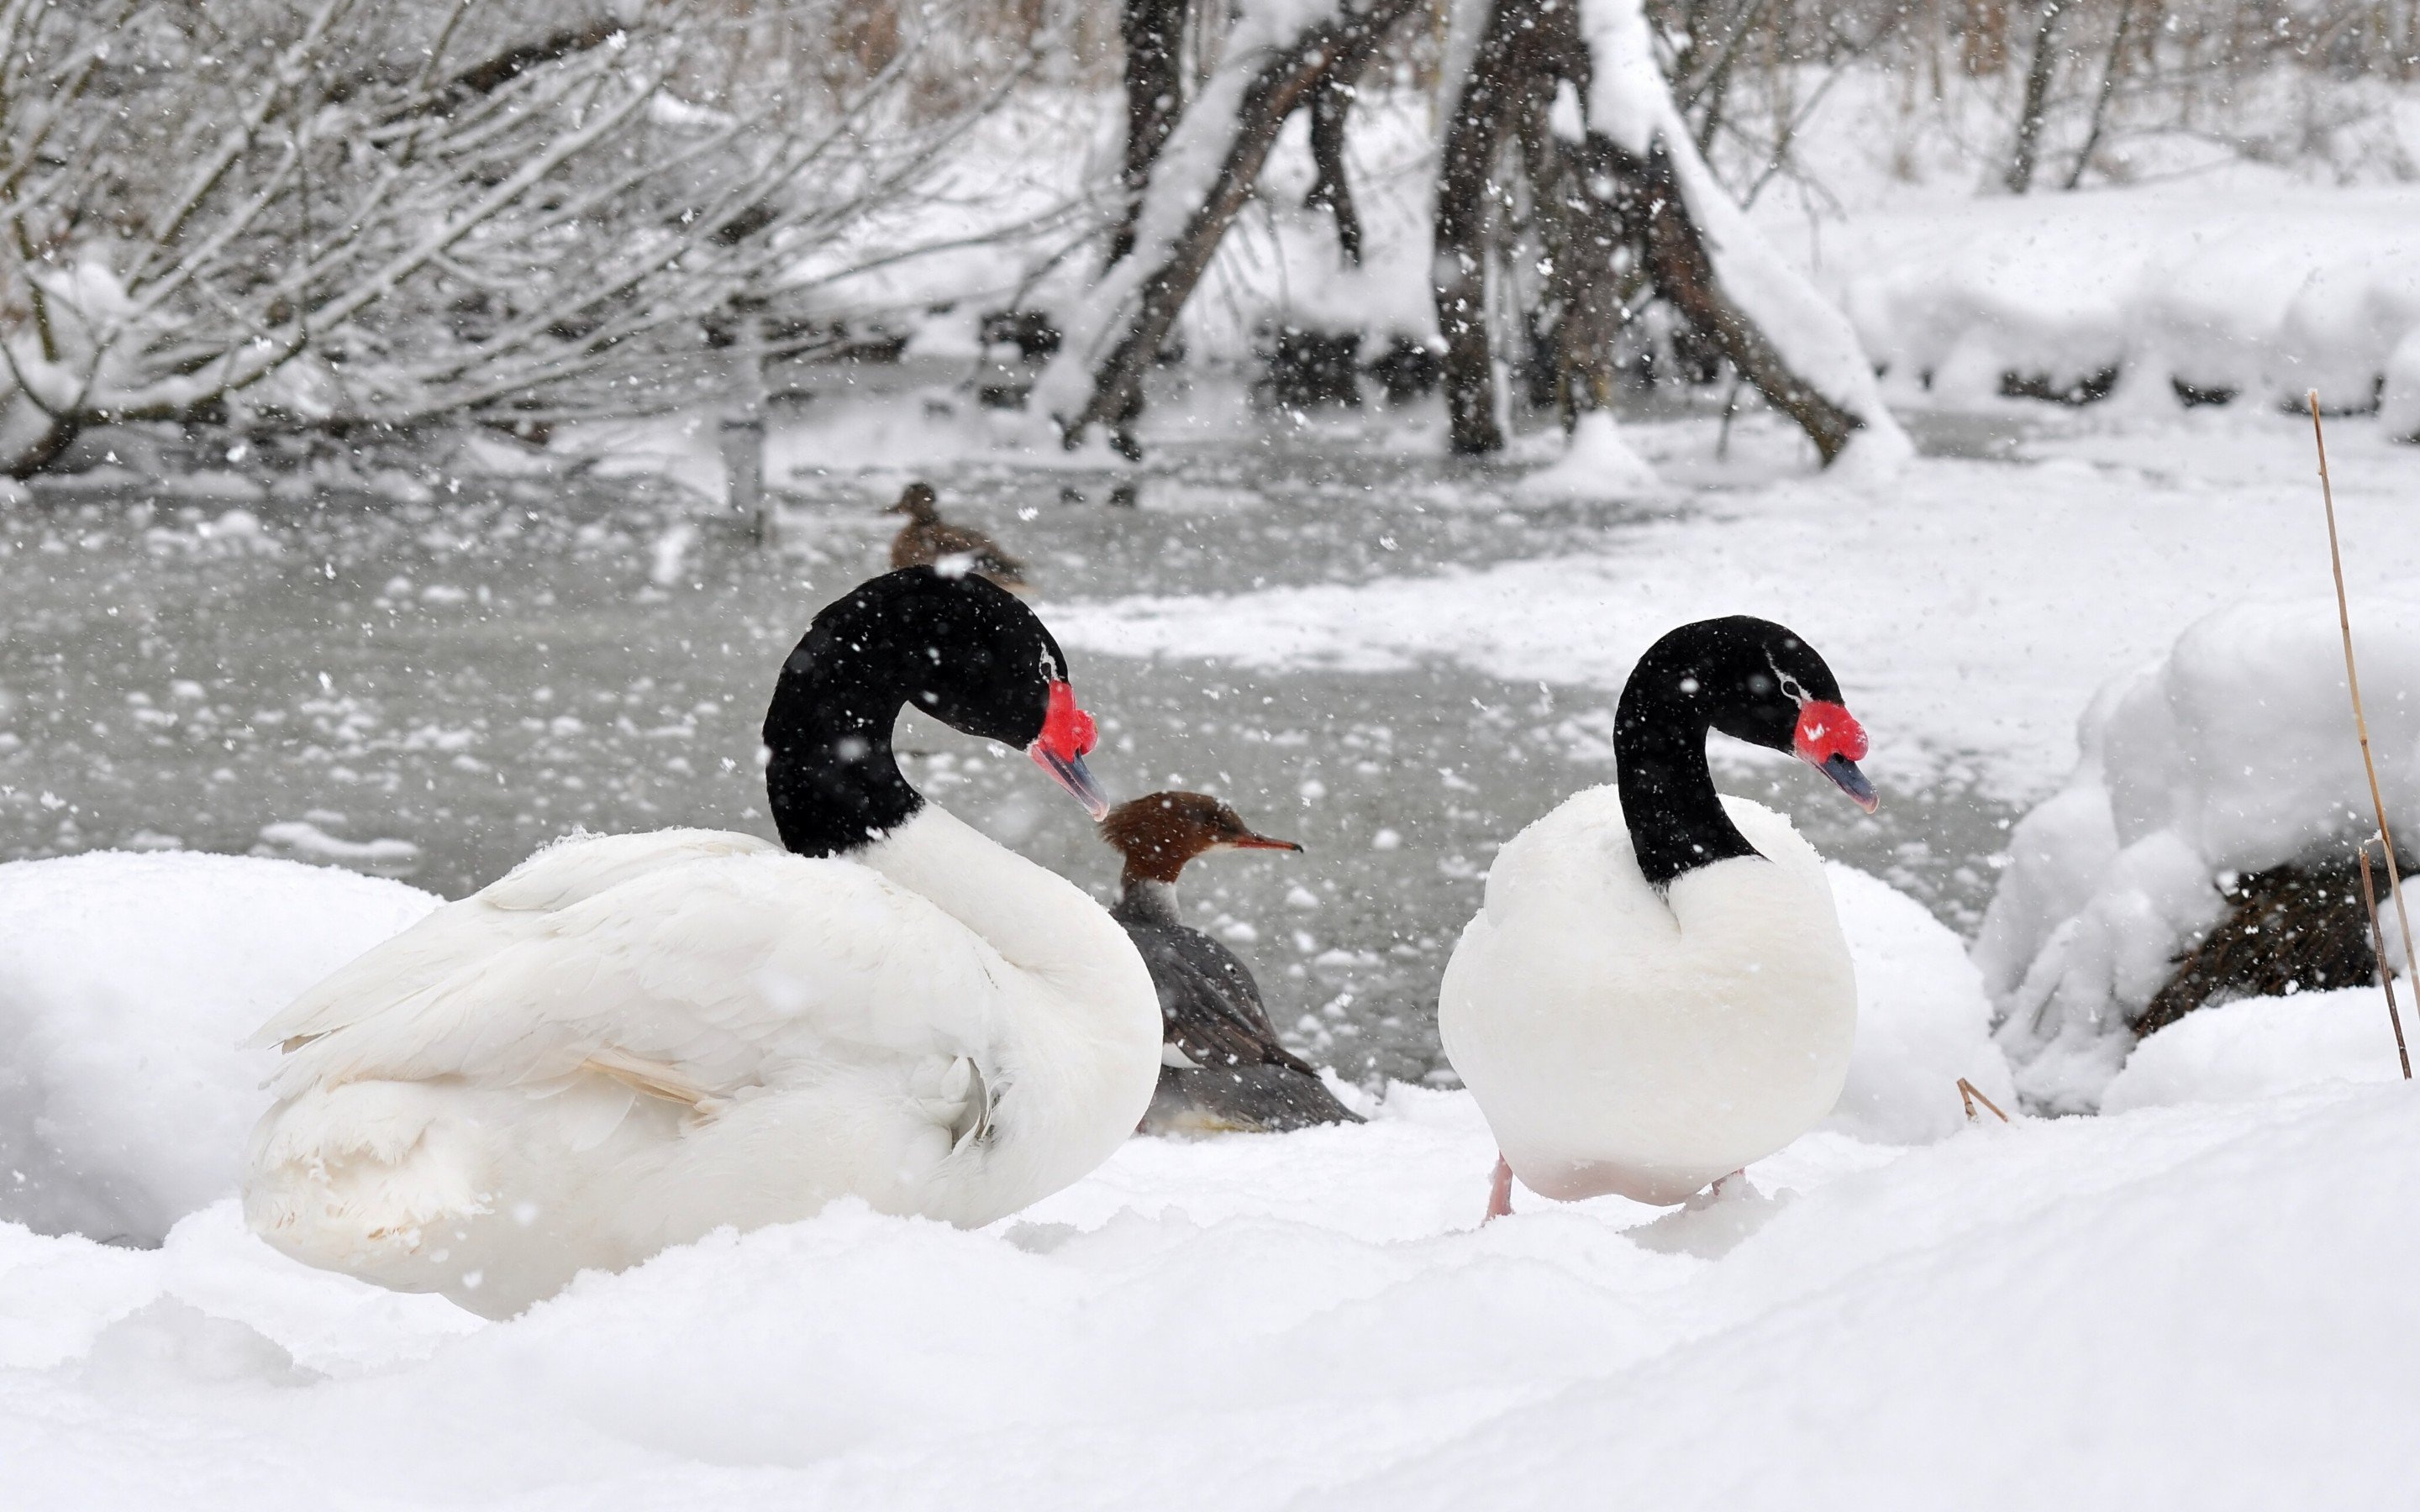 Winter snow landscape, Nature's tranquility, Geese in flight, HD wallpapers, 2880x1800 HD Desktop